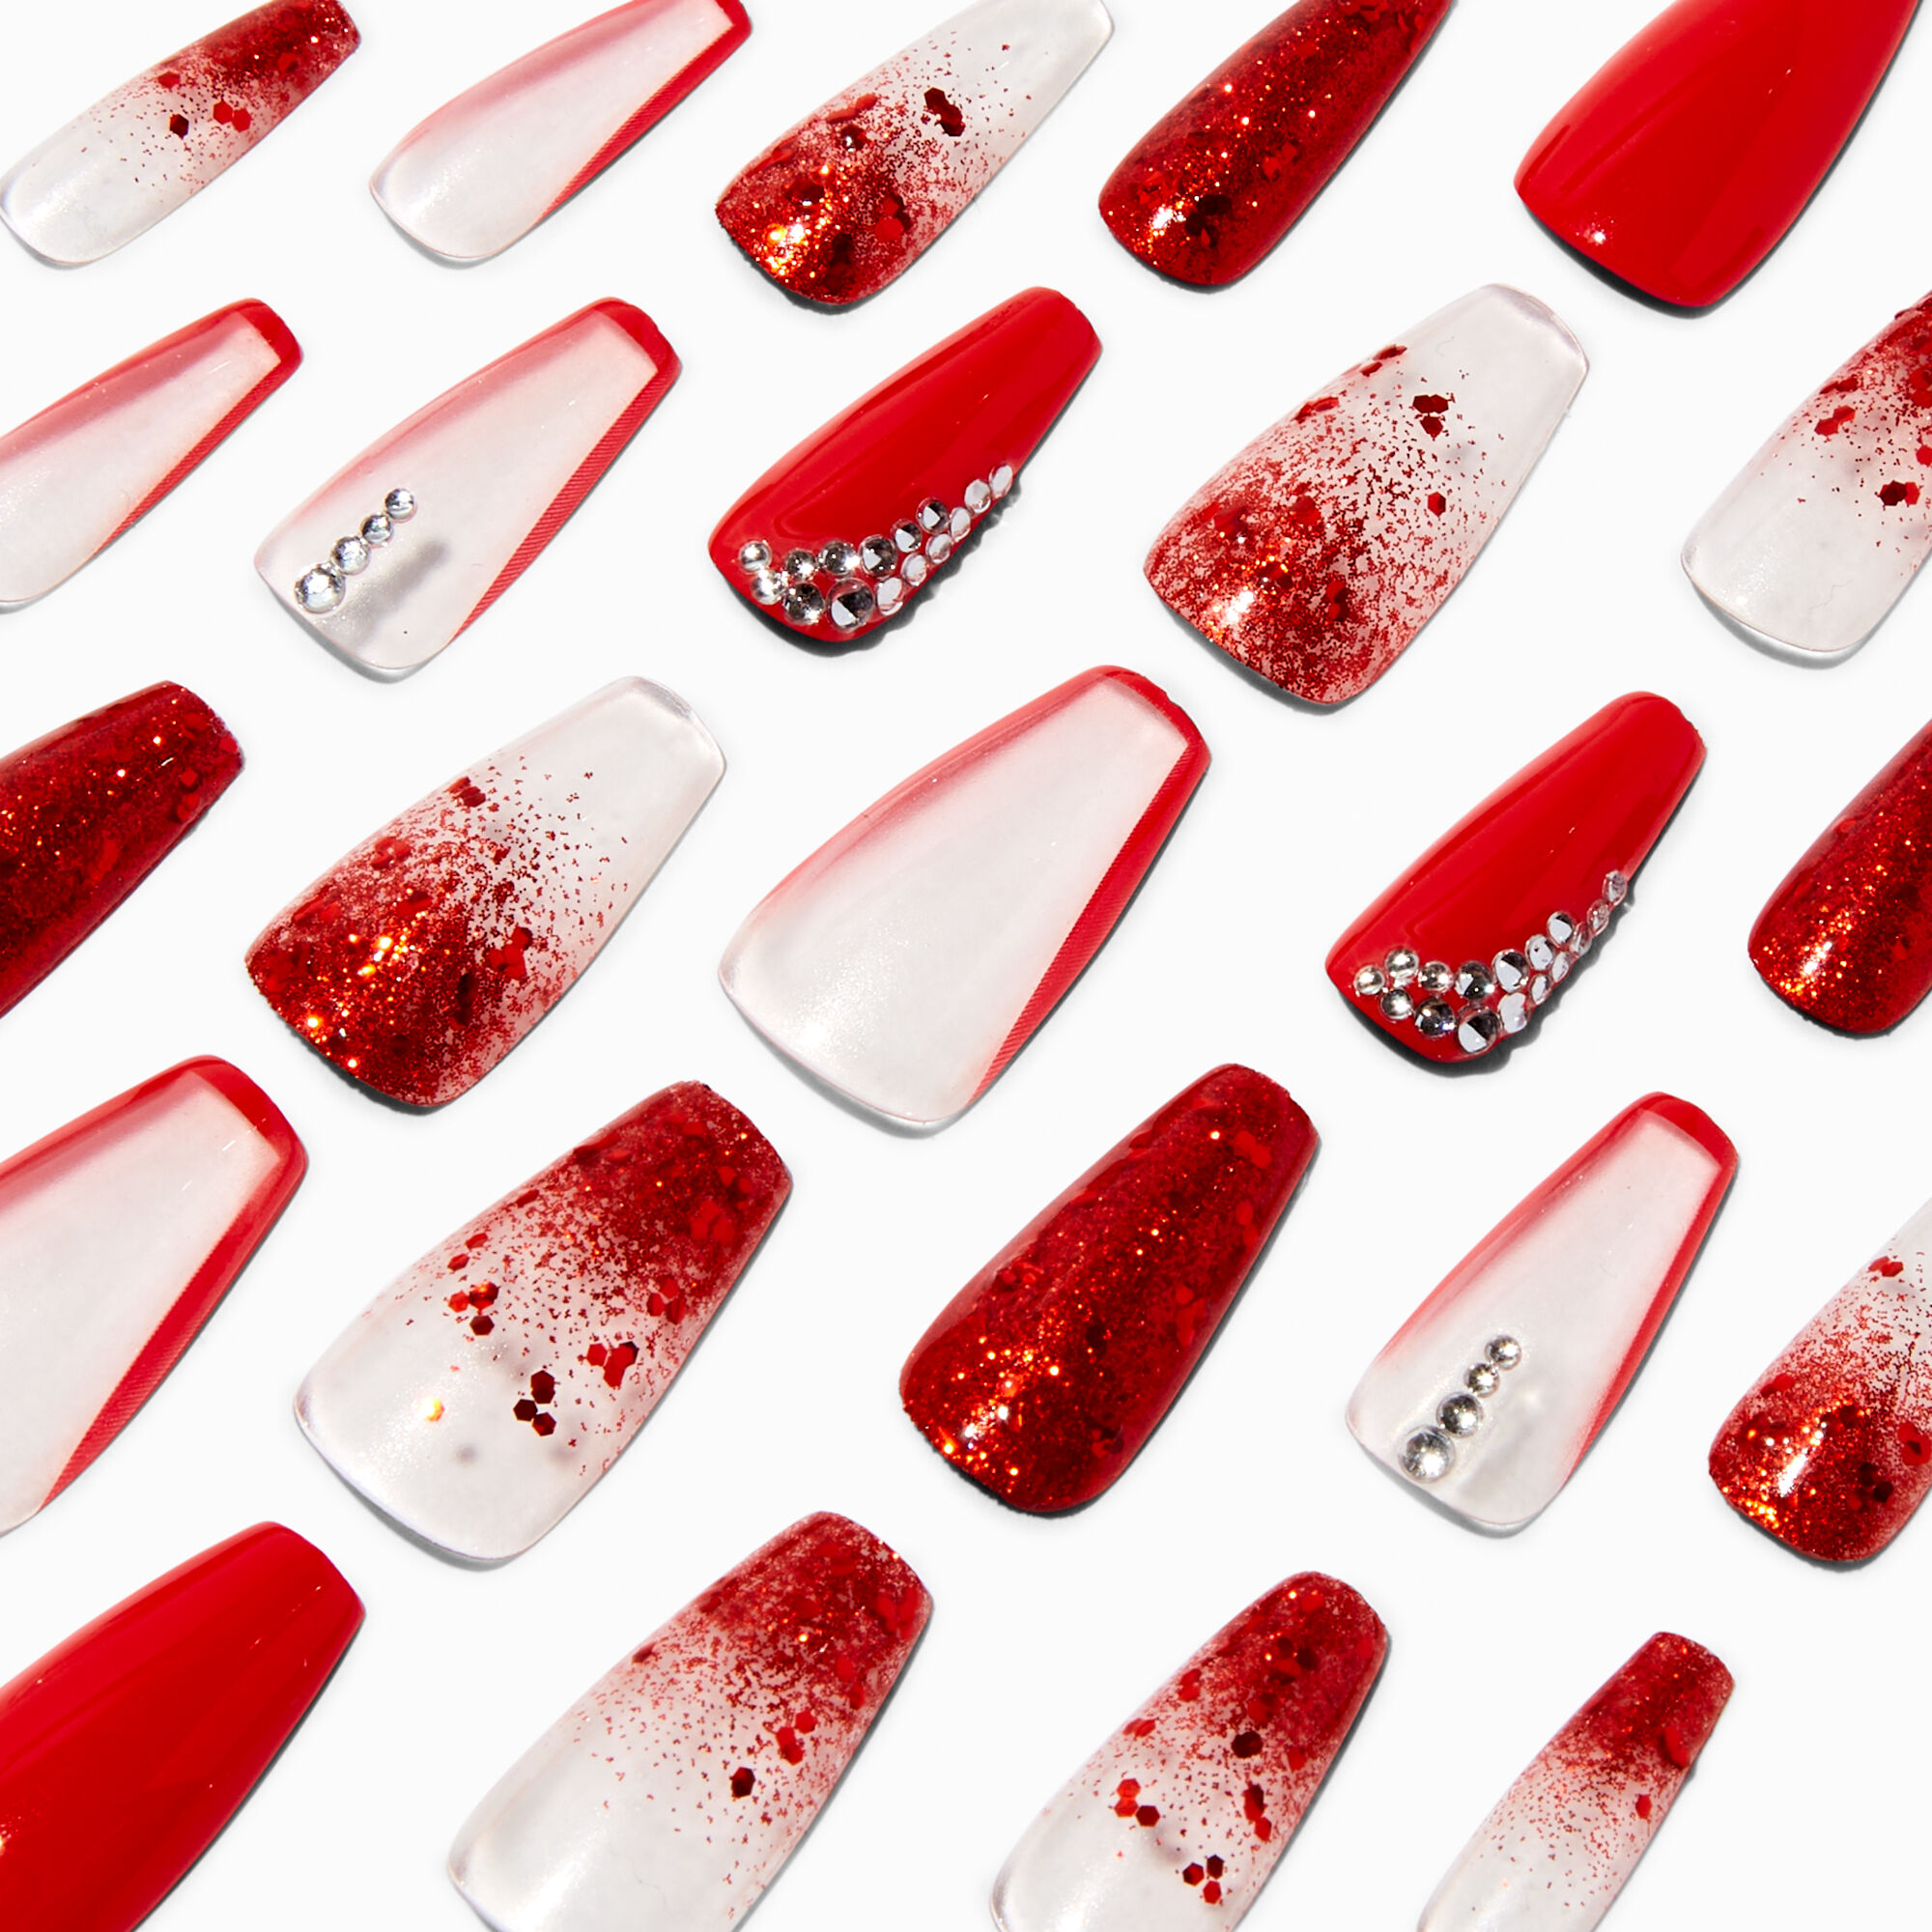 View Claires Tip Bling French Squareletto Vegan Faux Nail Set 24 Pack Red information